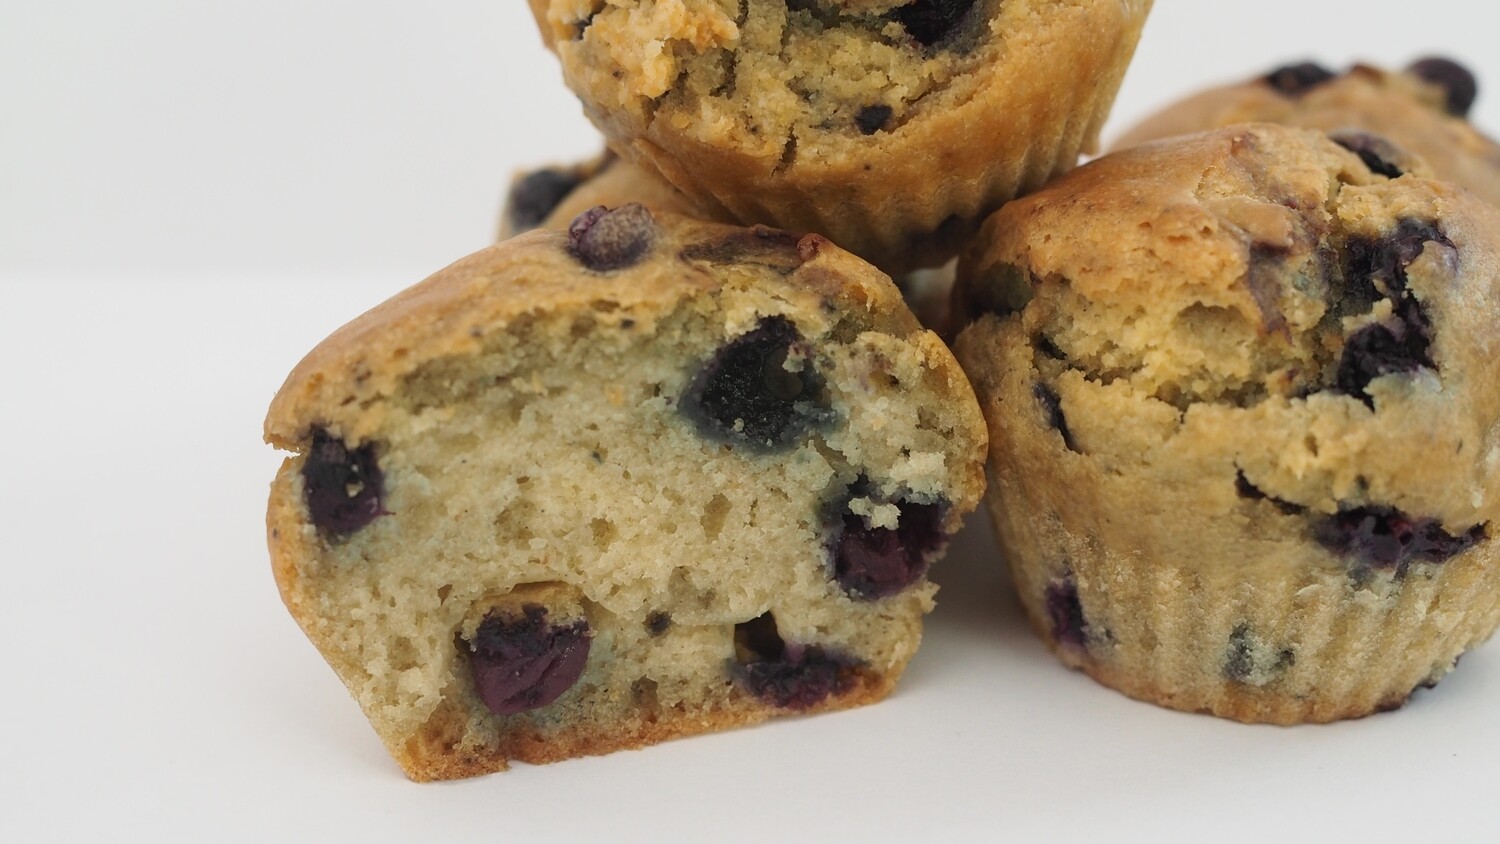 Vegan blueberry muffin with a hint of lemon flavor. GLUTEN FREE available.